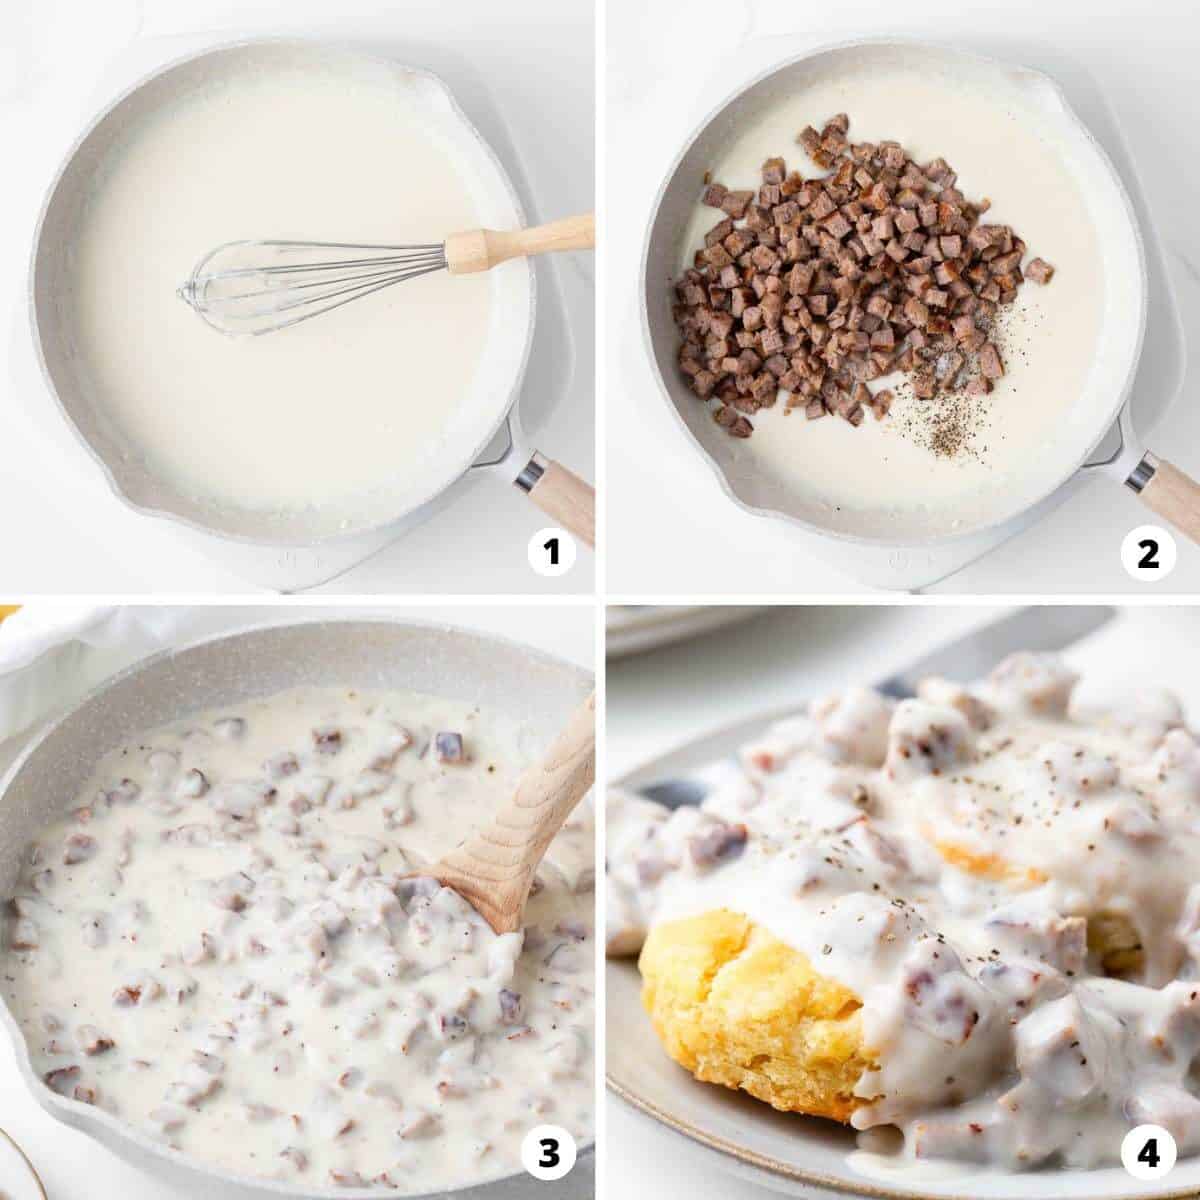 Showing how to make biscuits and gravy.